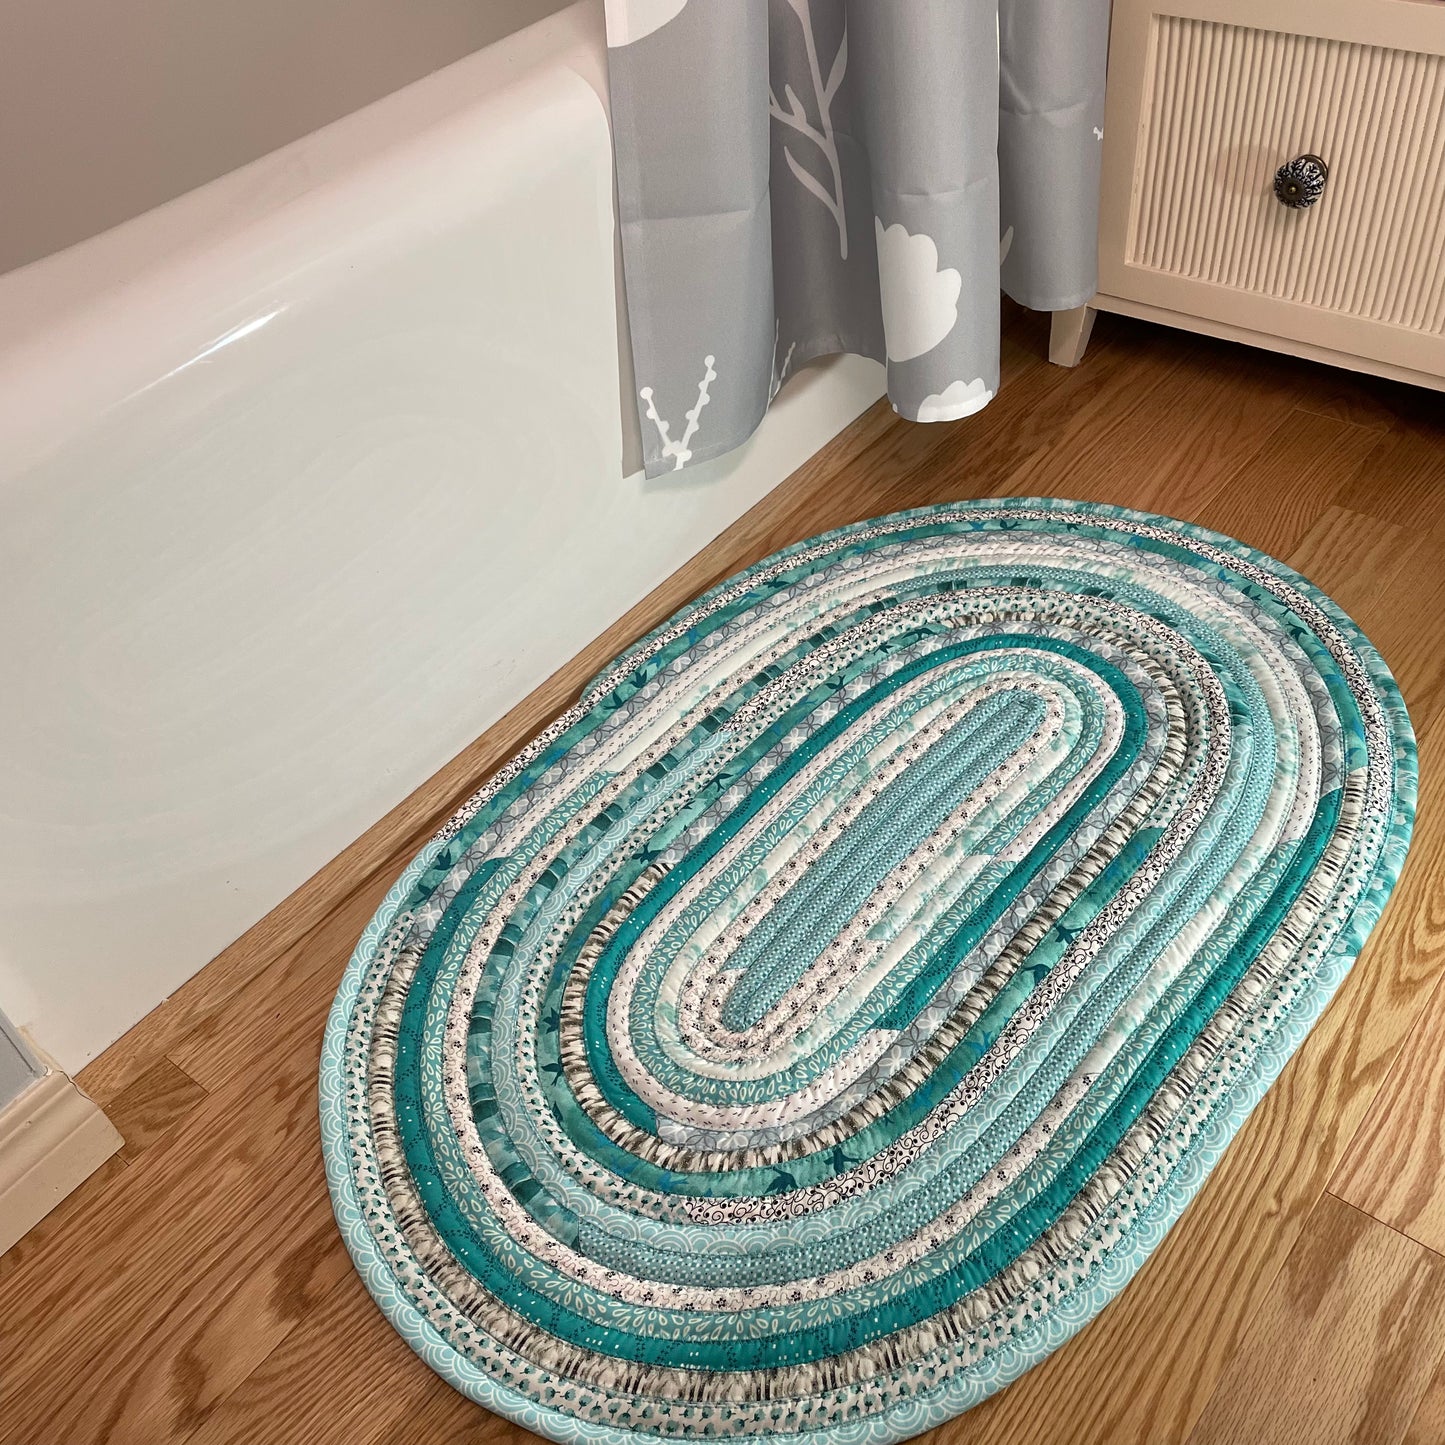 Teal and Black Kitchen Accent Rug, Washable Kitchen Mat or Luxury Bathmat - Home Stitchery Decor